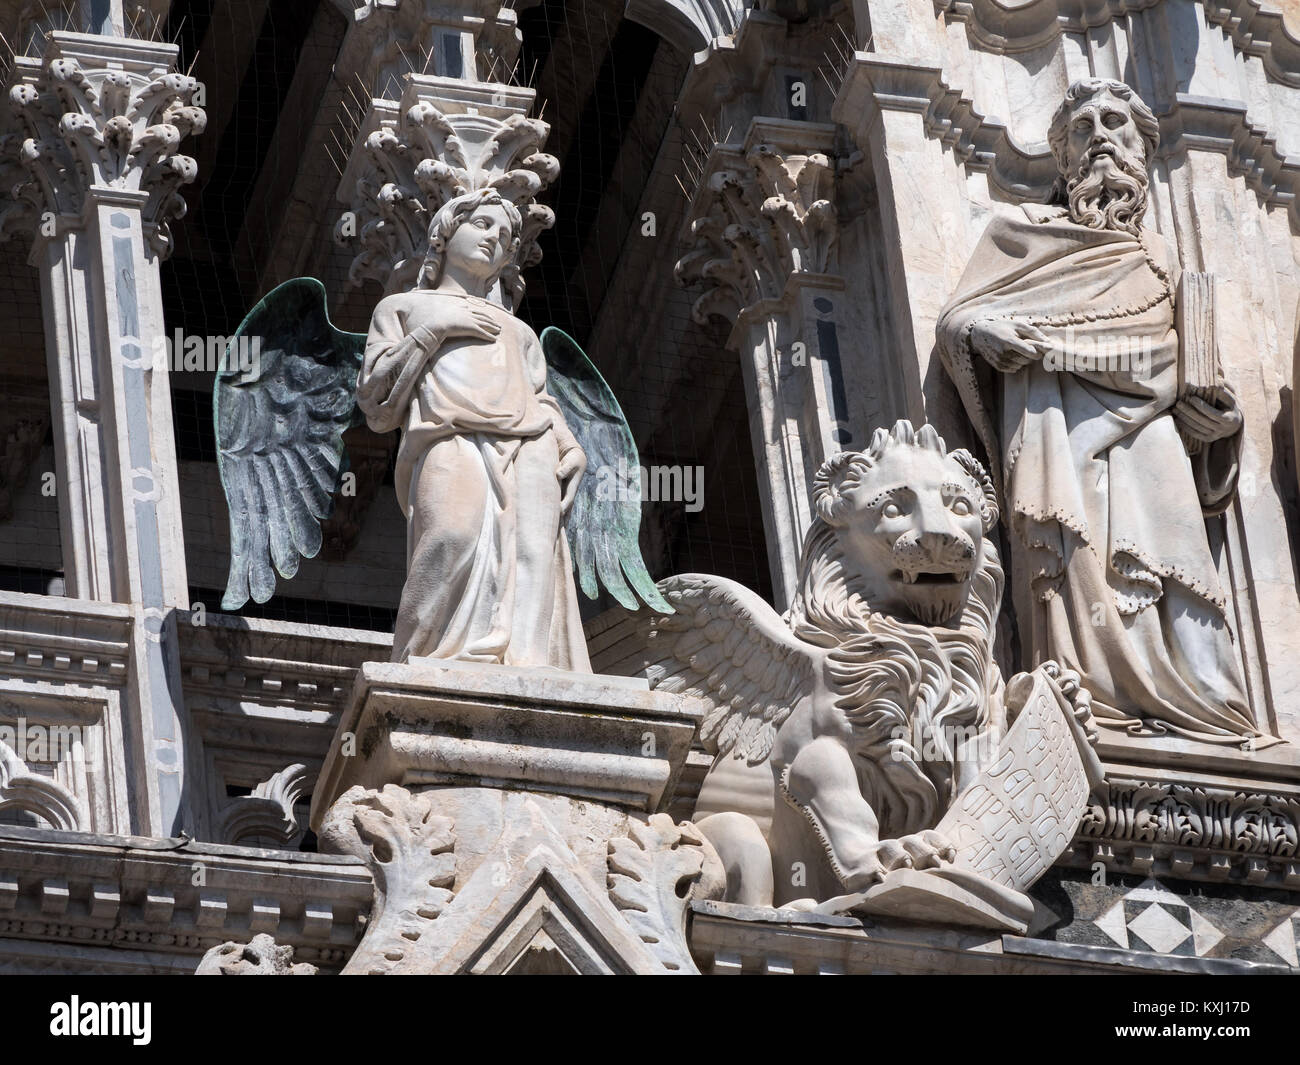 Statues of angel, lion and philosopher at Siena Cathedral Stock Photo